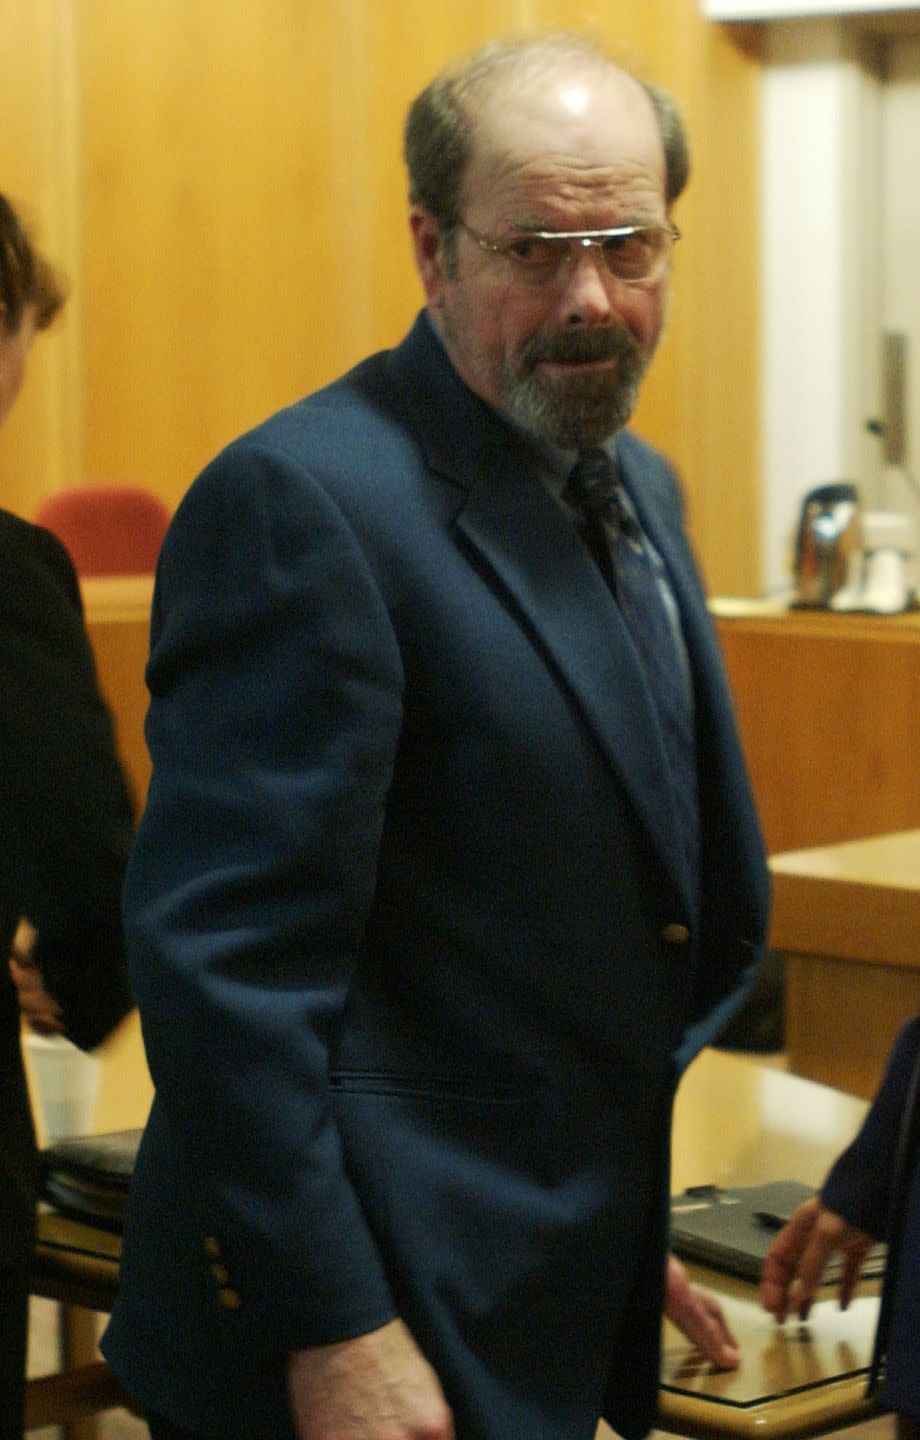 btk killer dennis rader turning back and looking to his right as he leaves a courtroom